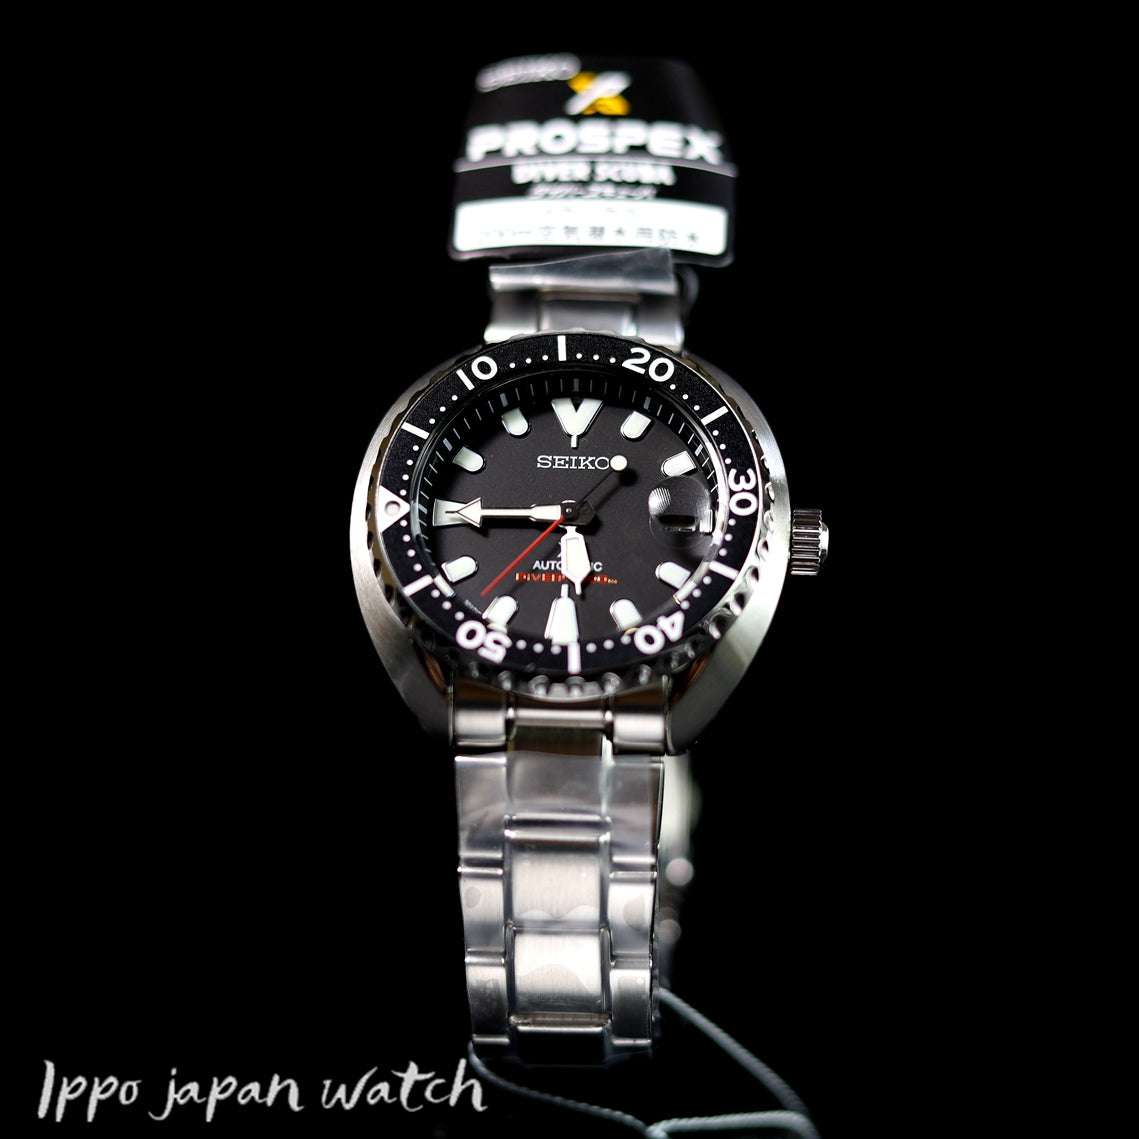 Seiko Prospex SBDY085 Diver's 200M Mechanical Watch – IPPO JAPAN WATCH